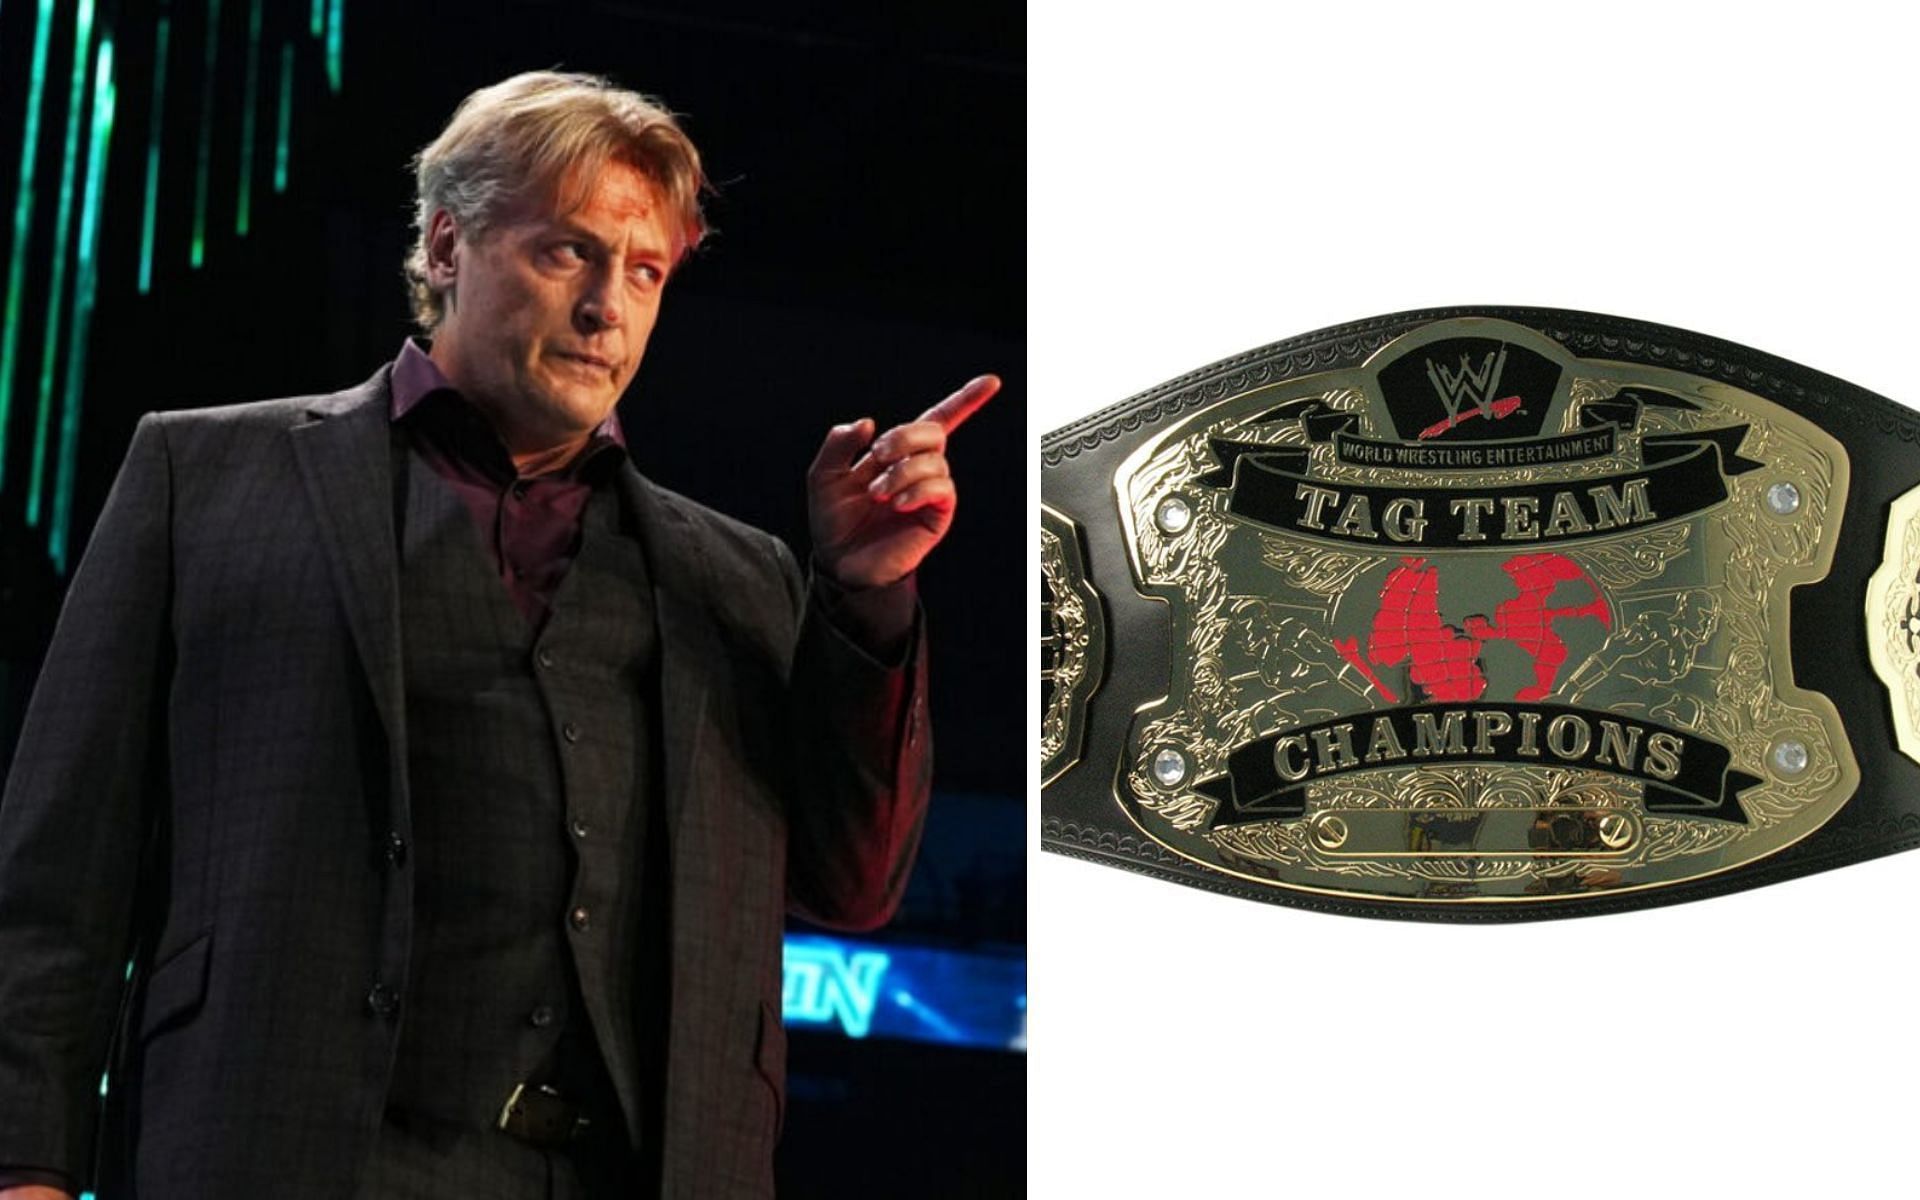 William Regal is a former four-time Tag Team Champion